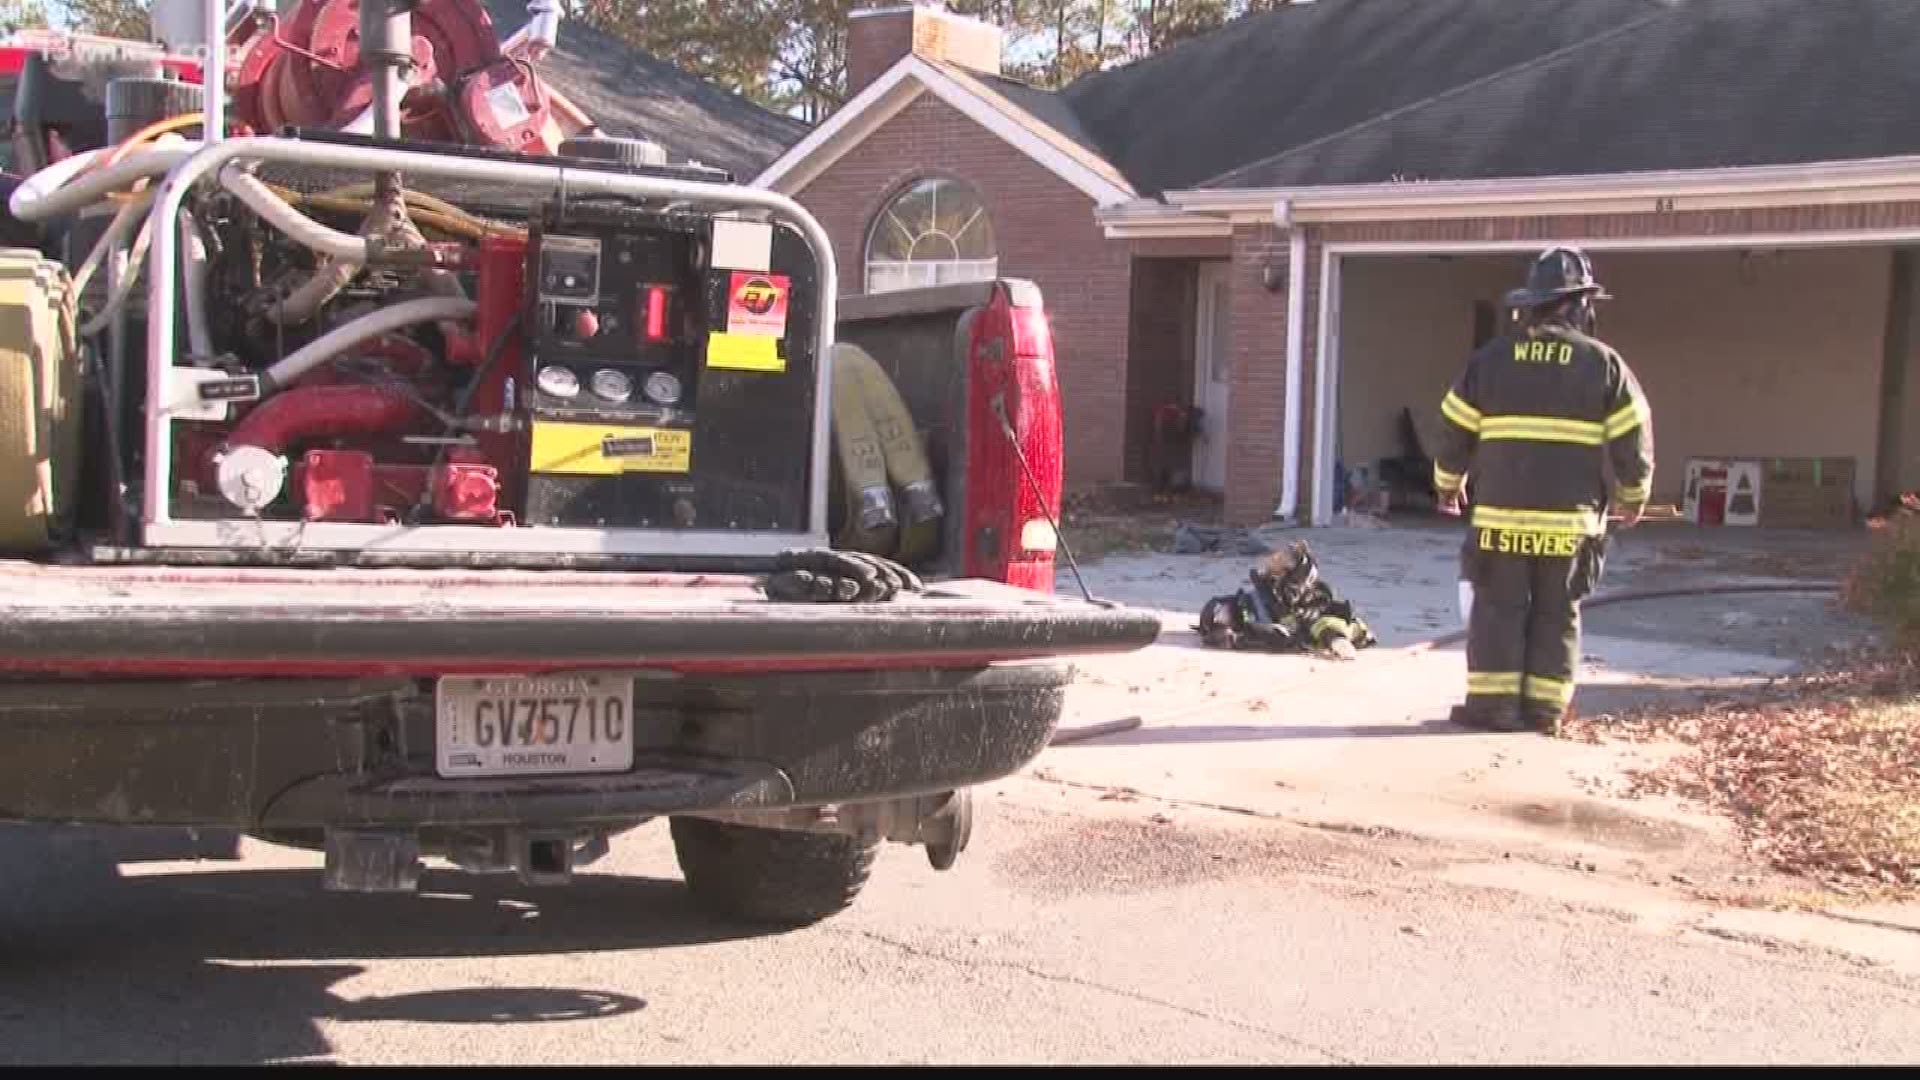 After a fire at a Warner Robins duplex Sunday, the fire department is reminding people to be safe while burning leaves.